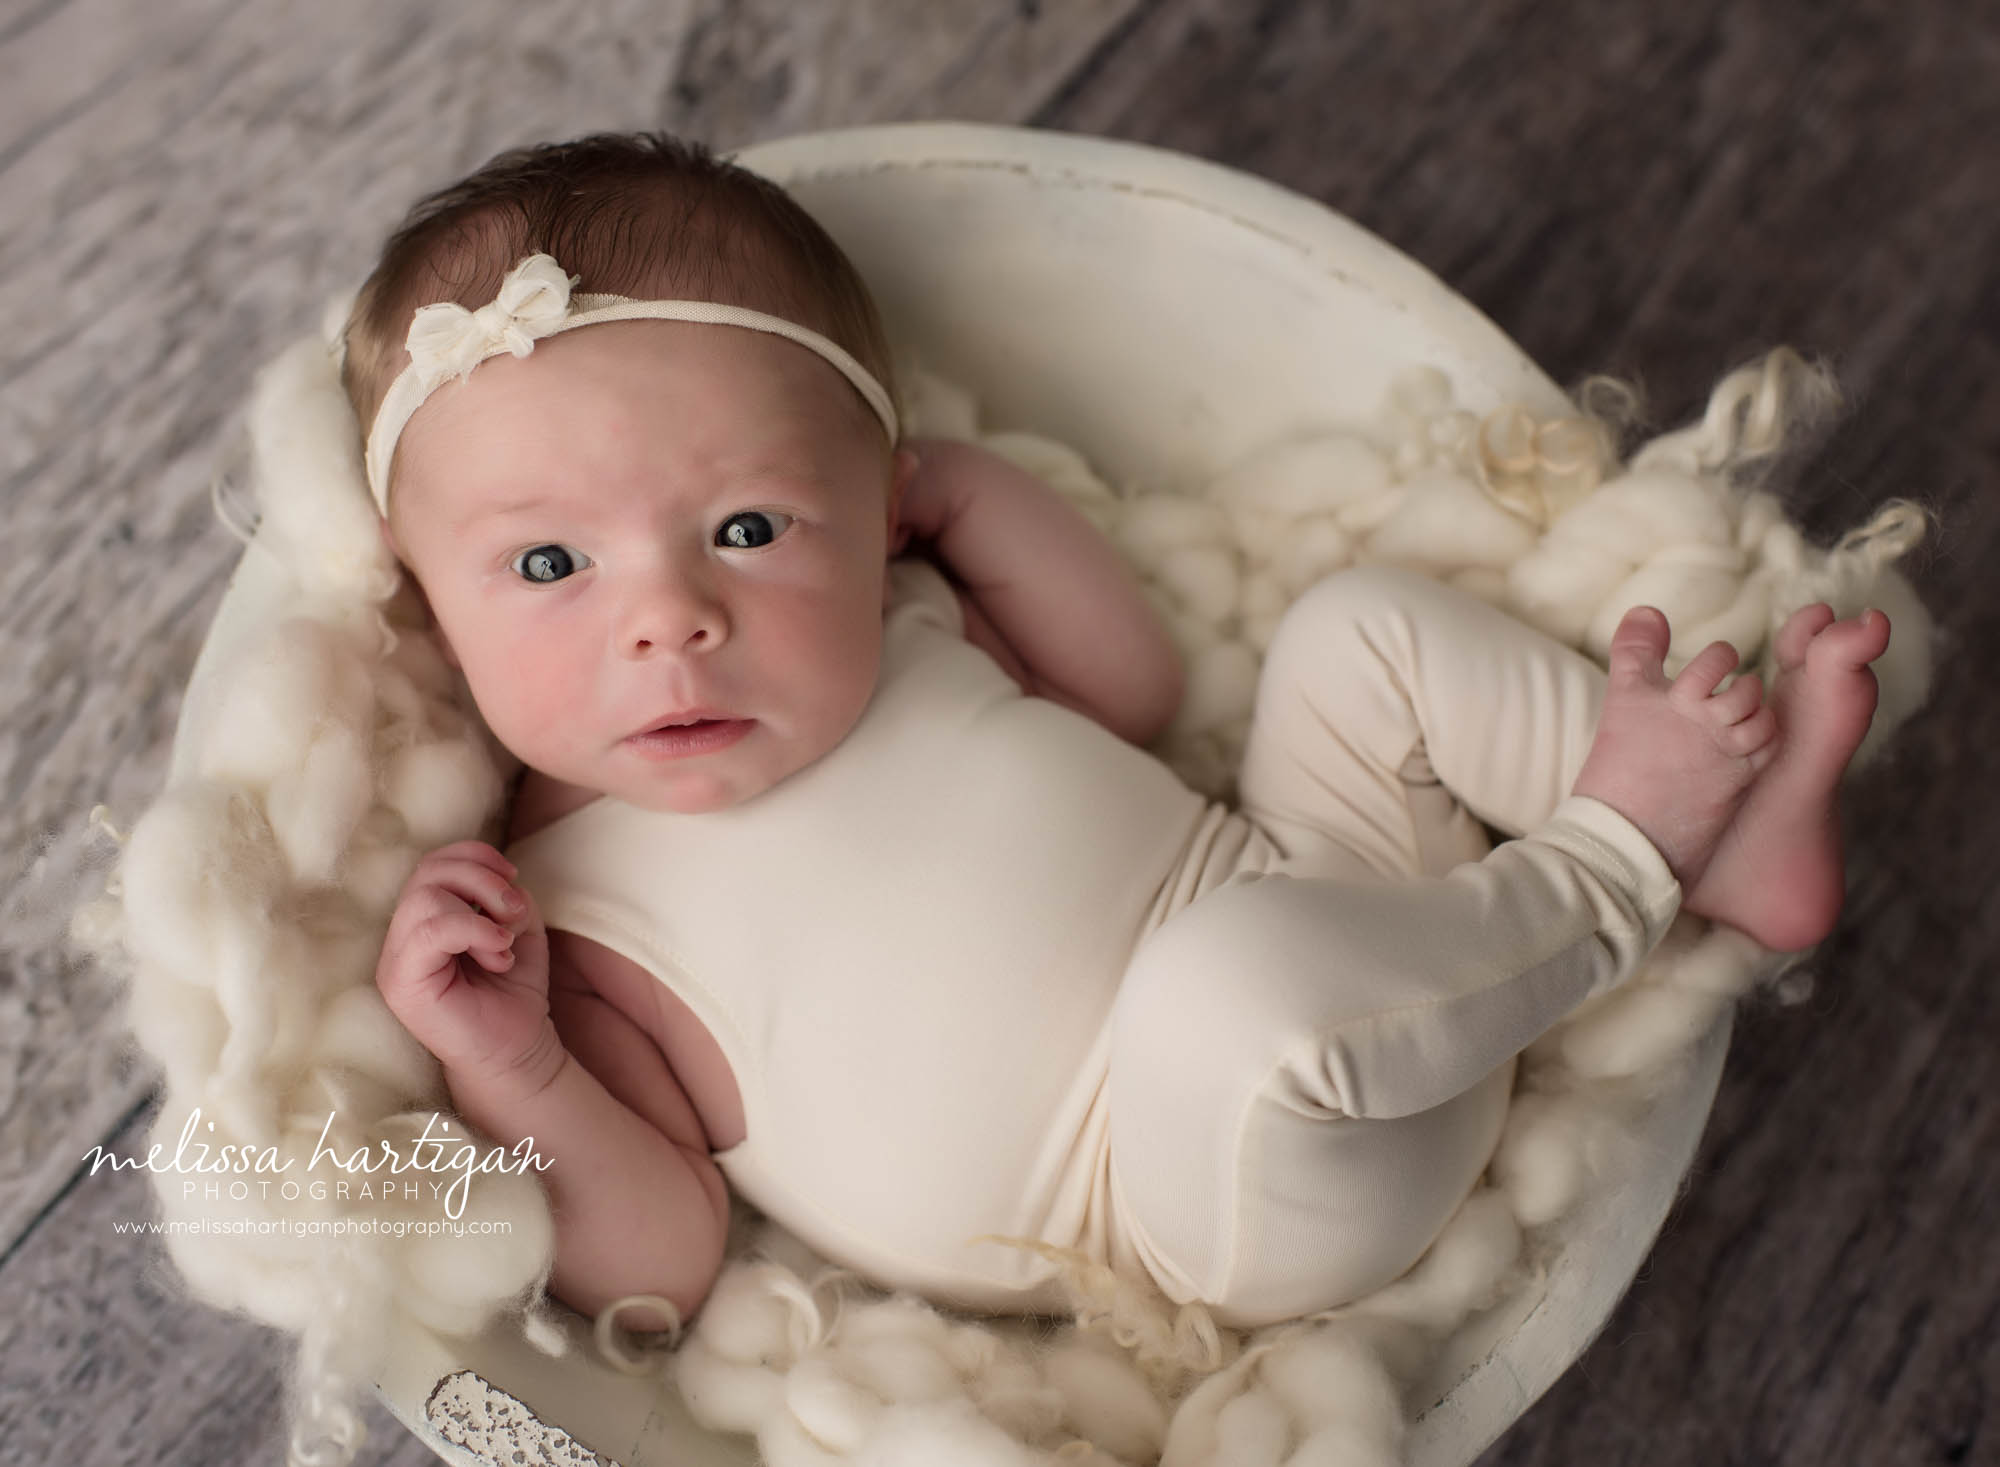 awake newborn baby girl wearing cream romper with bow tie back posed in creamo wooden bowl with braided cream layer